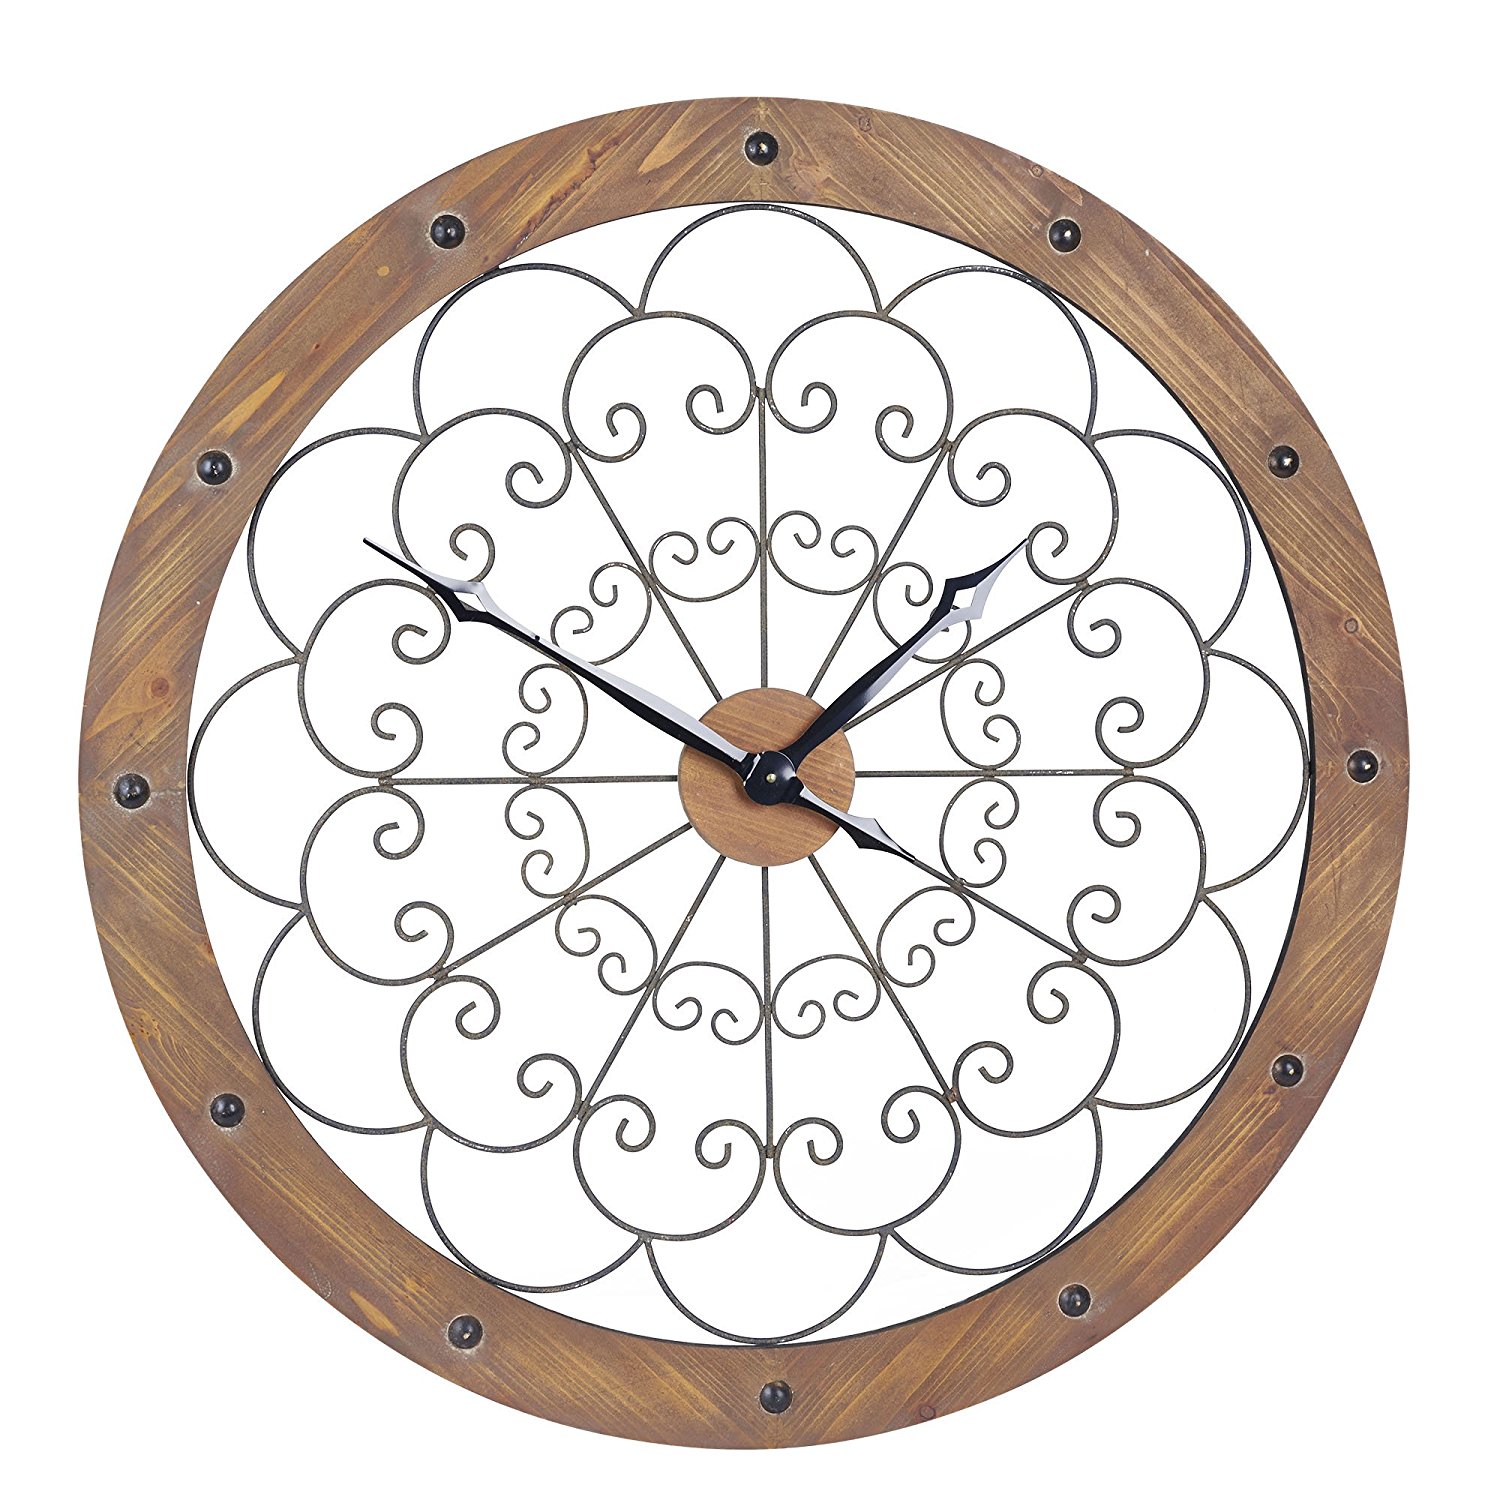 Household Essentials 2364-1 Oversized Decorative Wall Clock, Wood Frame, Metal Scroll